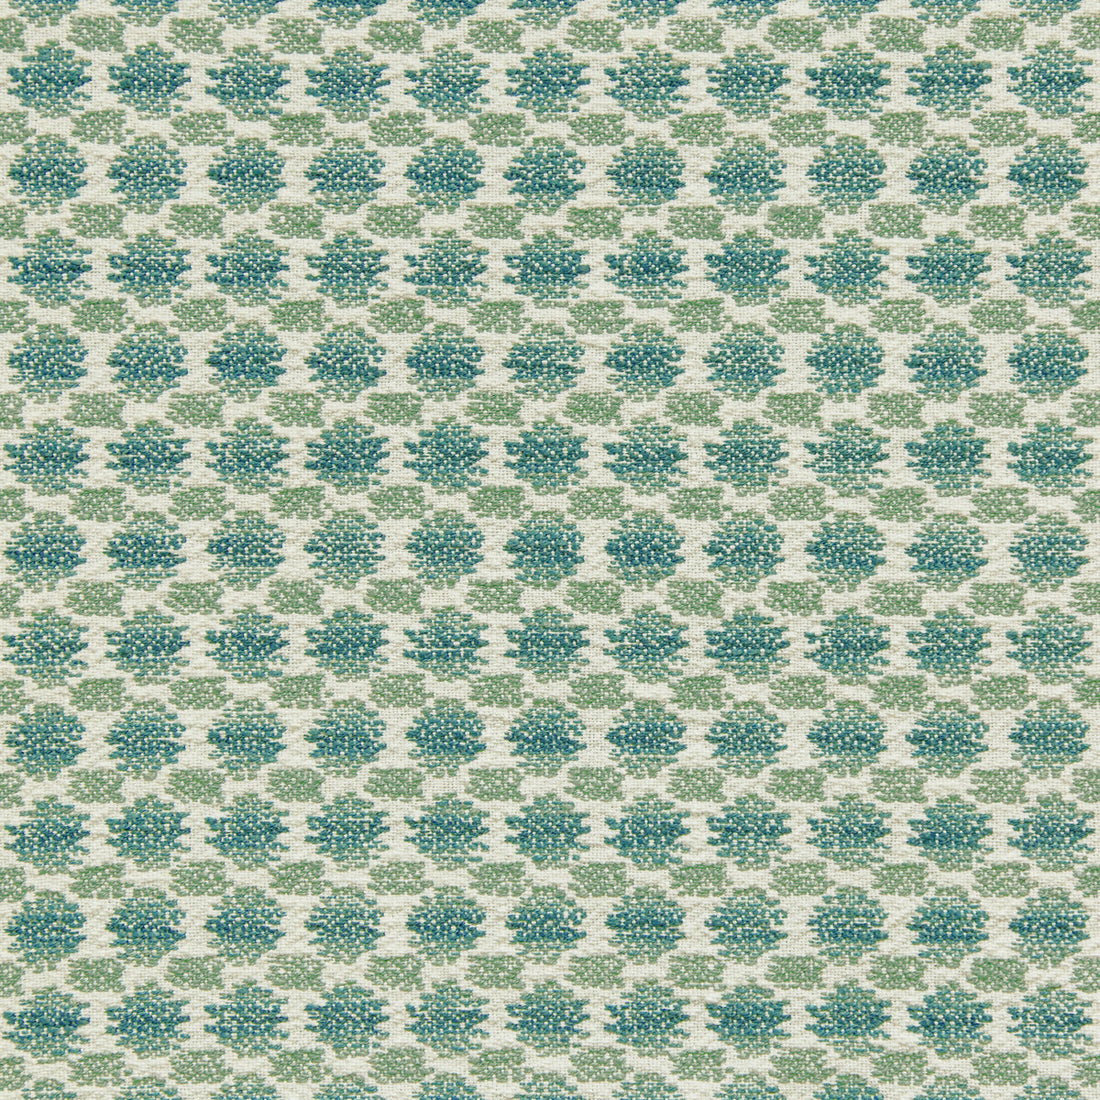 Lancing Weave fabric in aqua color - pattern 2020100.13.0 - by Lee Jofa in the Linford Weaves collection